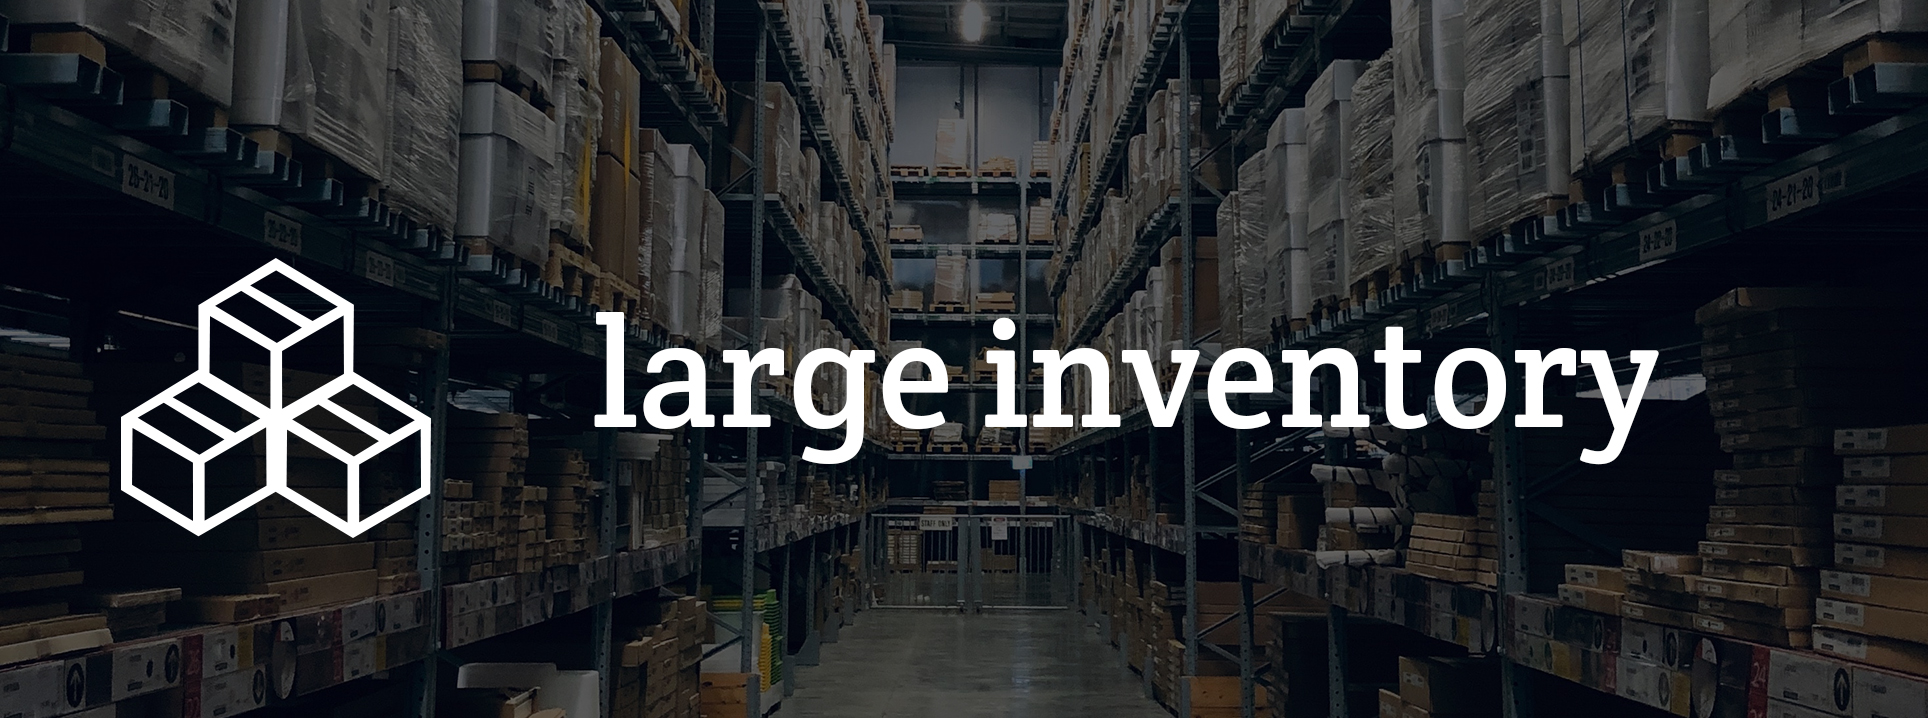 large inventory